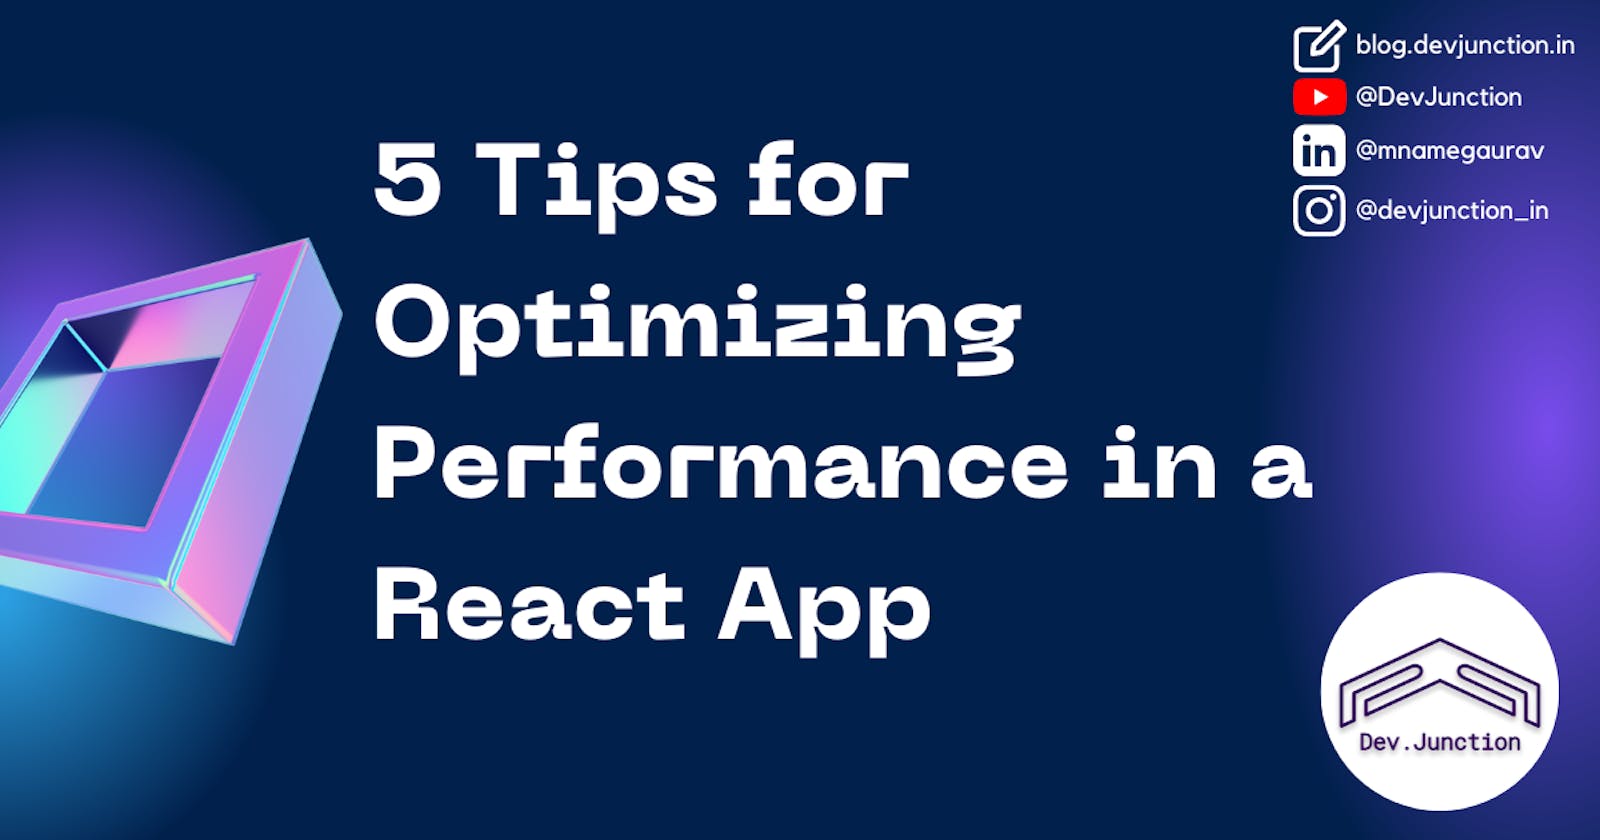 5 Tips for Optimizing Performance in a React App